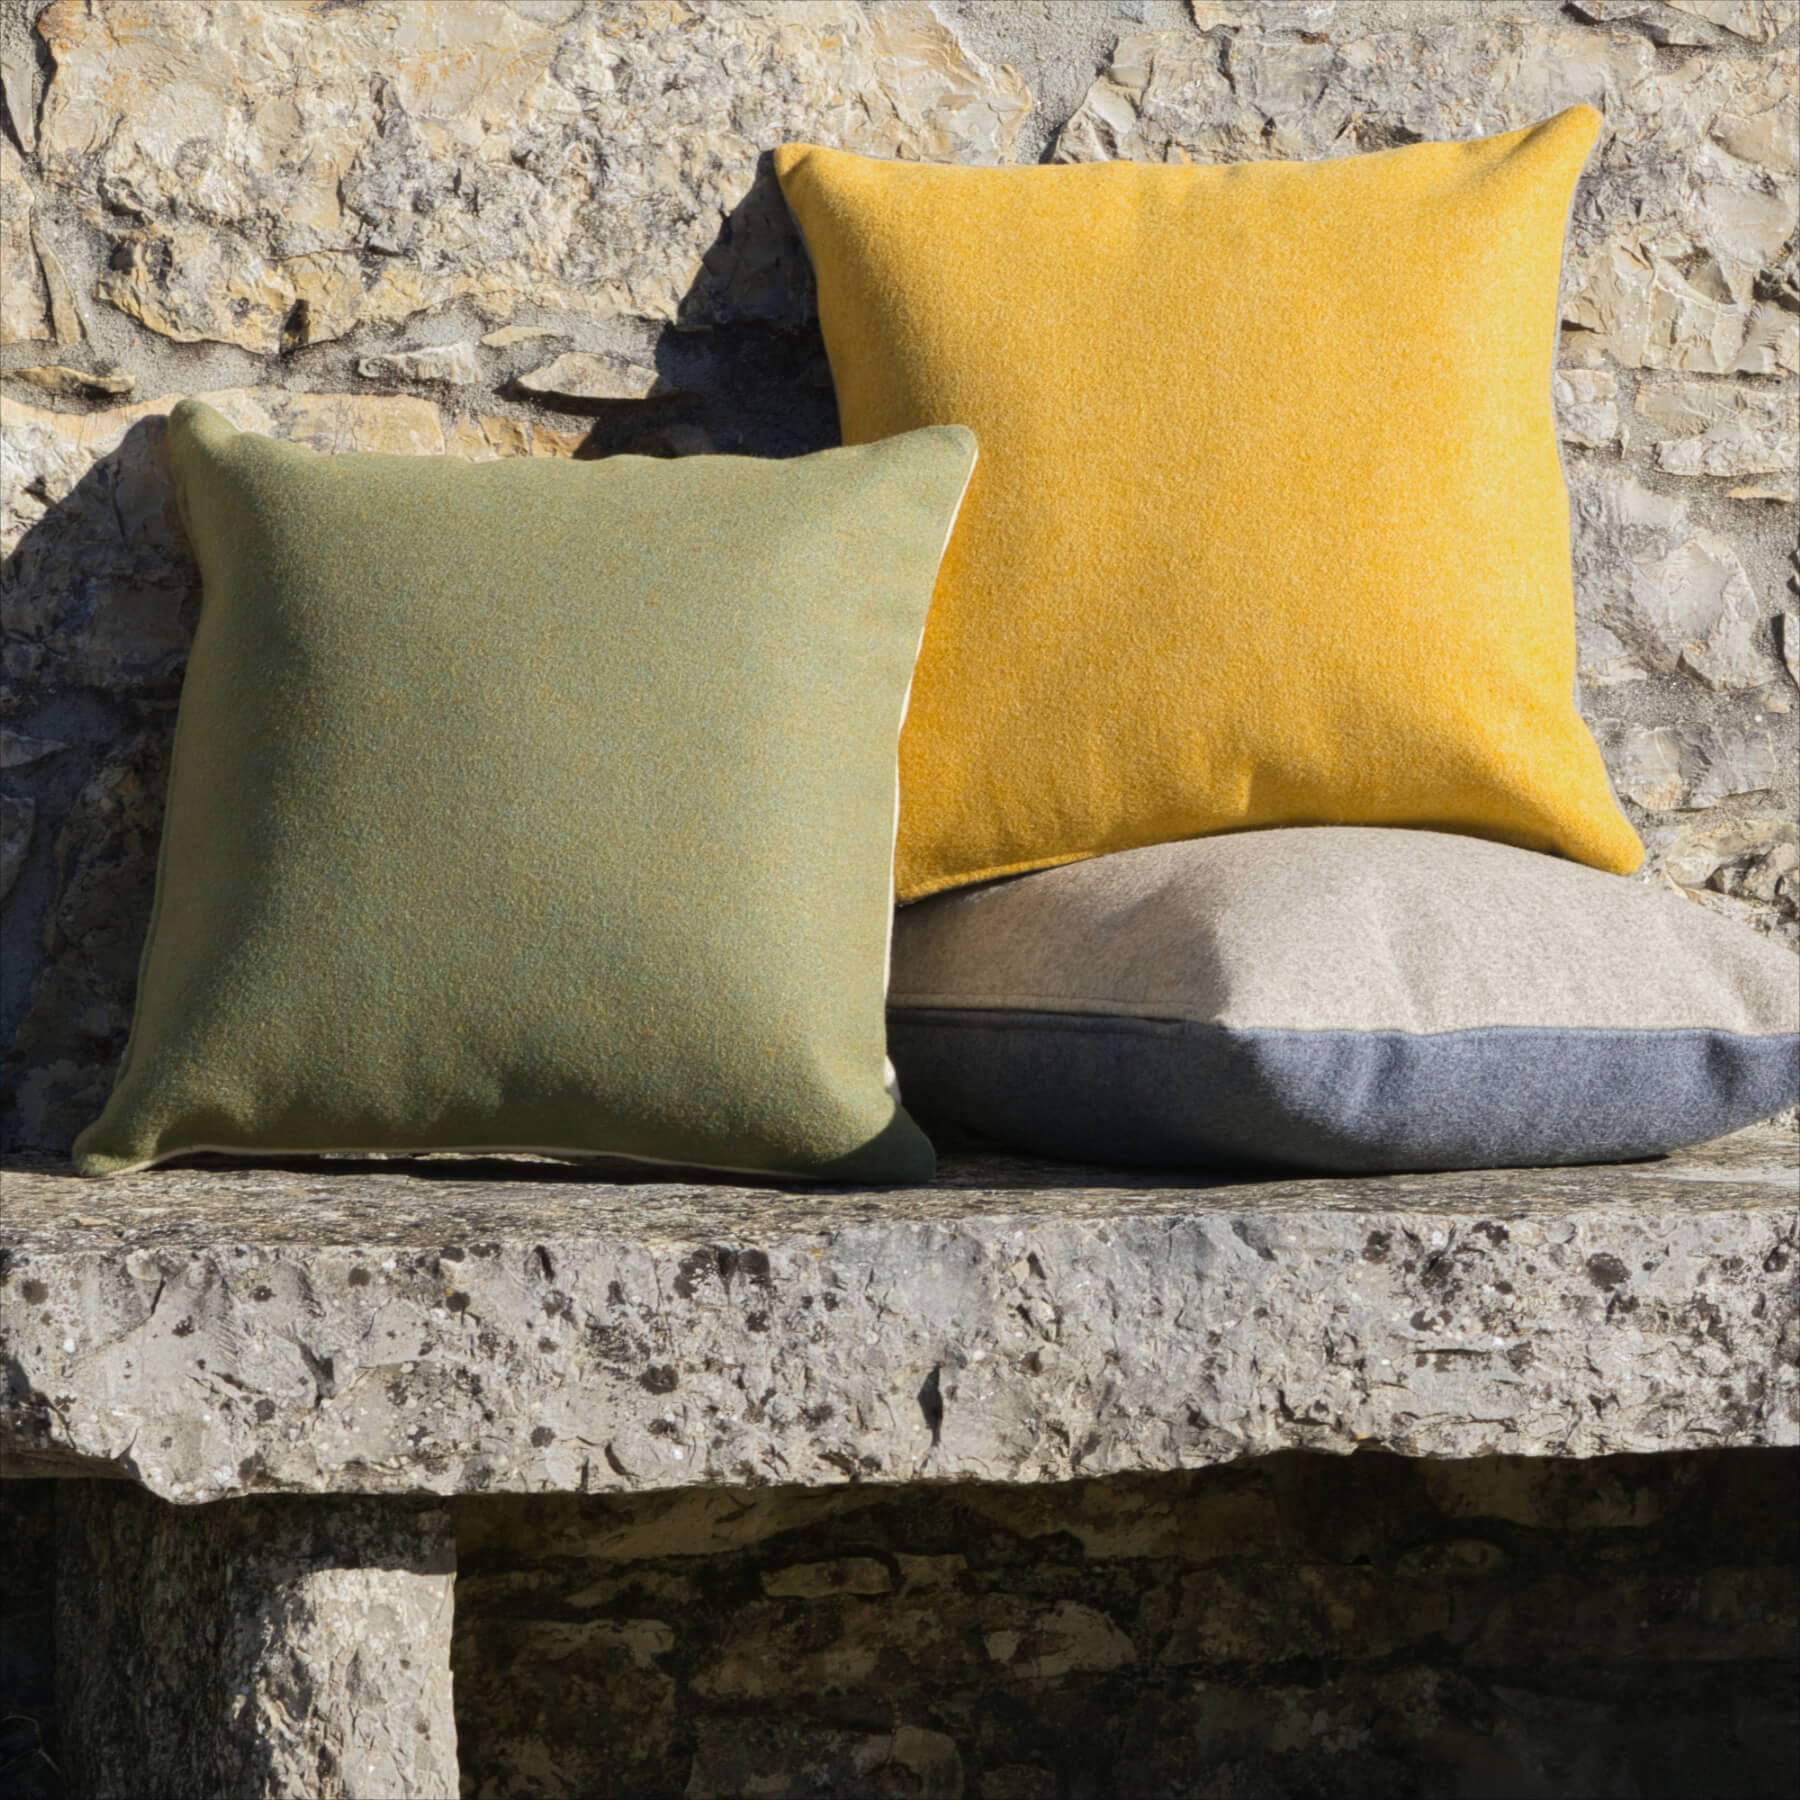 Decorative Cushion Bicolor 40 x 40 cm, 100% Sheep's Wool – Double-Sided: Amber & Light Gray